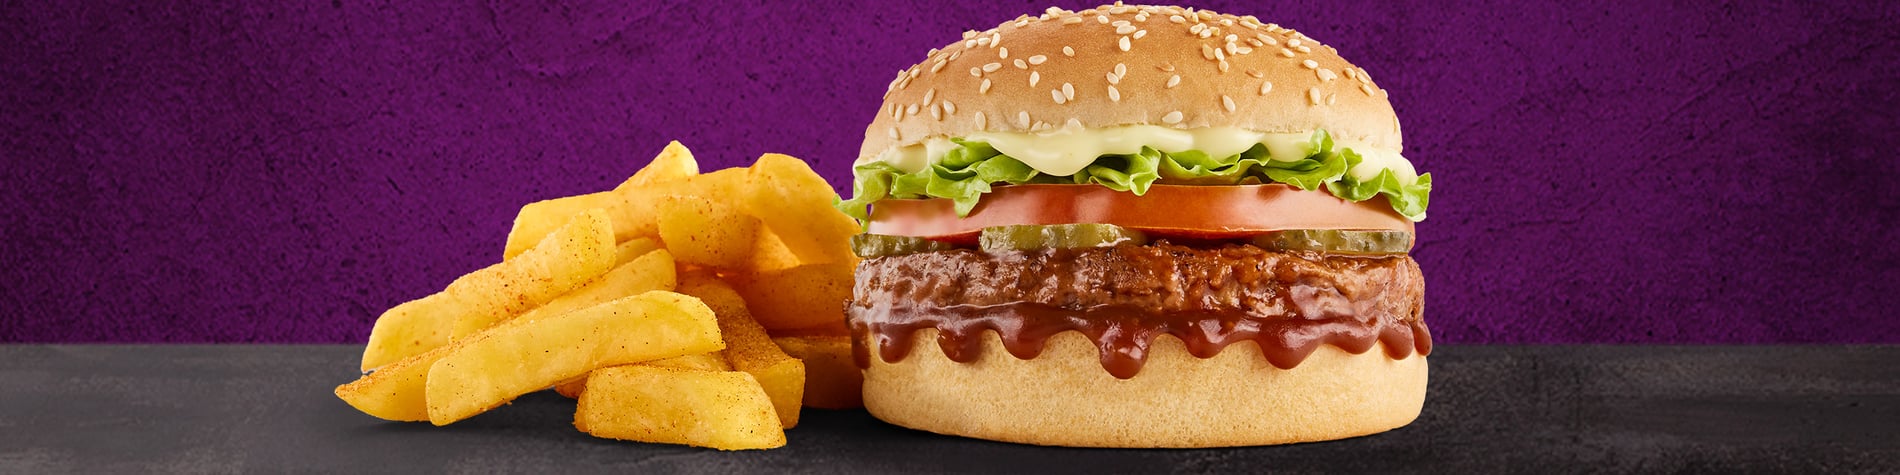 The NEW Mo’MjojoTM Burger Meal from Steers® Musina Mall. 2 Flame-Grilled pure beef patties, pineapple, macon, tomato, lettuce, and small Famous Hand-Cut Chips, on a purple background.